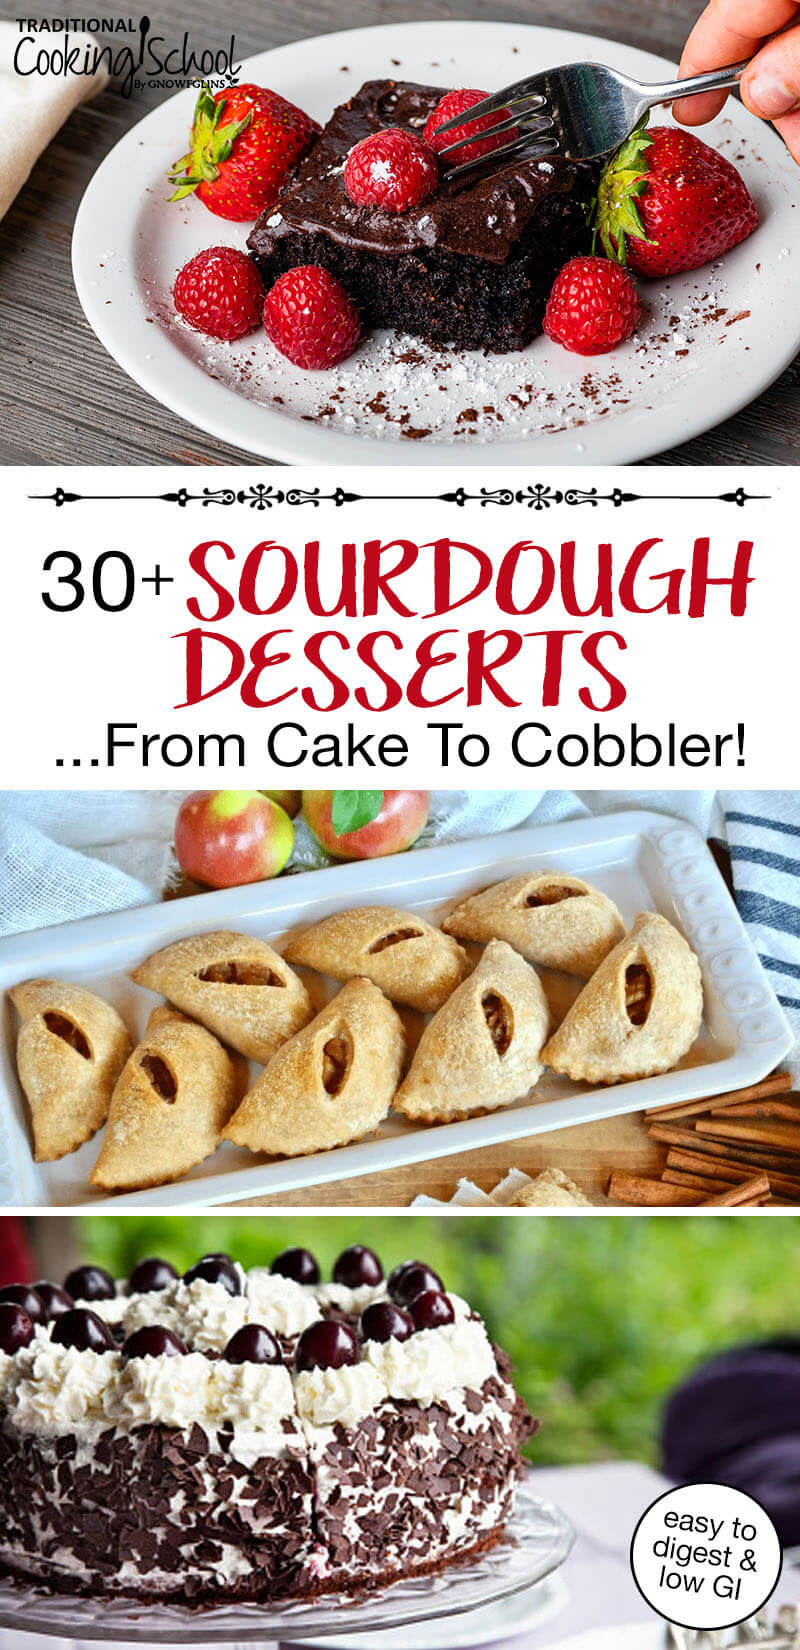 Photo collage of sourdough desserts: chocolate cake topped with chocolate ganache and fresh berries, black forest cake, and miniature maple apple pies. Text overlay says: "30+ Sourdough Dessert Recipes ...From Cake To Cobbler! (easy to digest & low GI)"